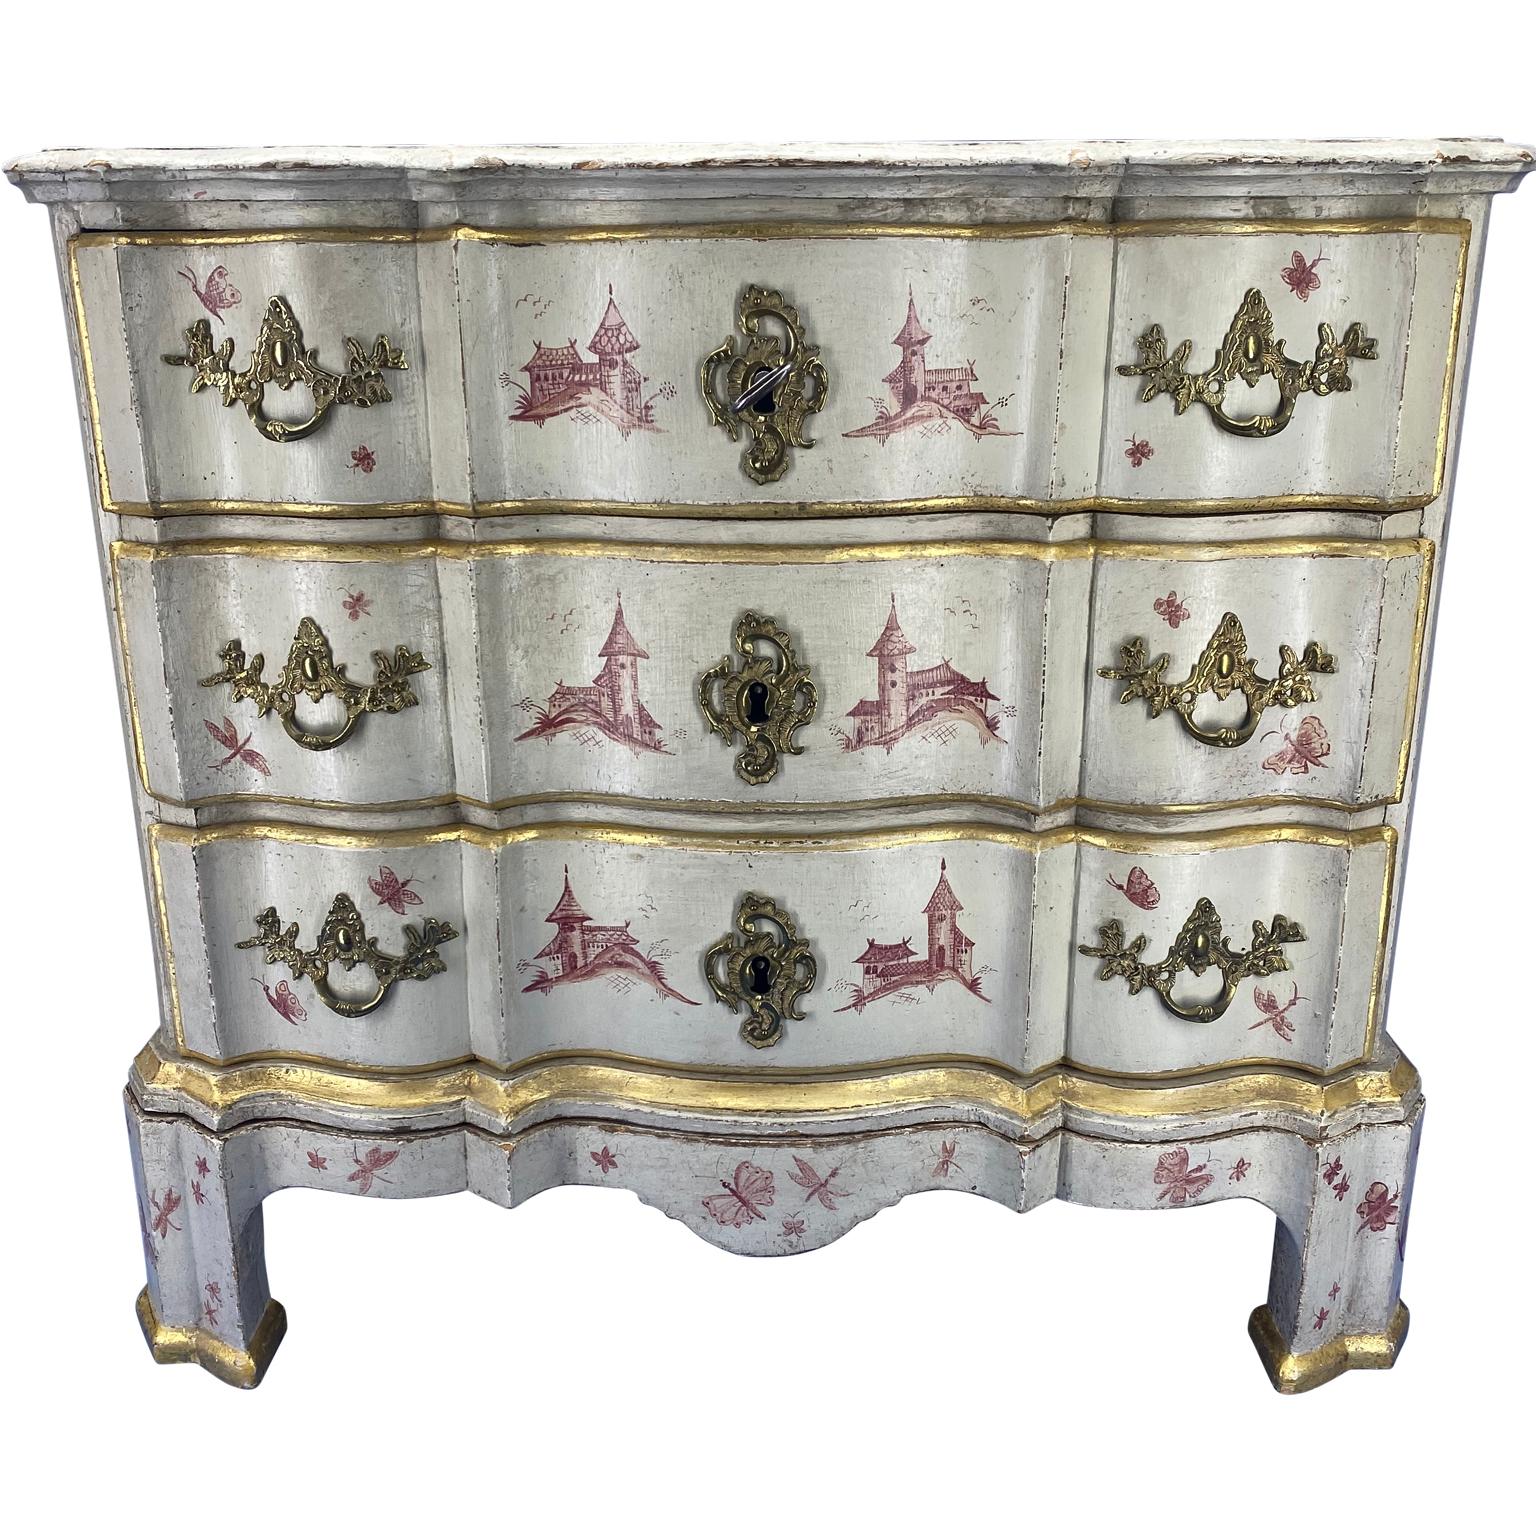 Danish 18th century painted Baroque 3-drawer chest with later chinoiserie decorations, brass hardware and locks.